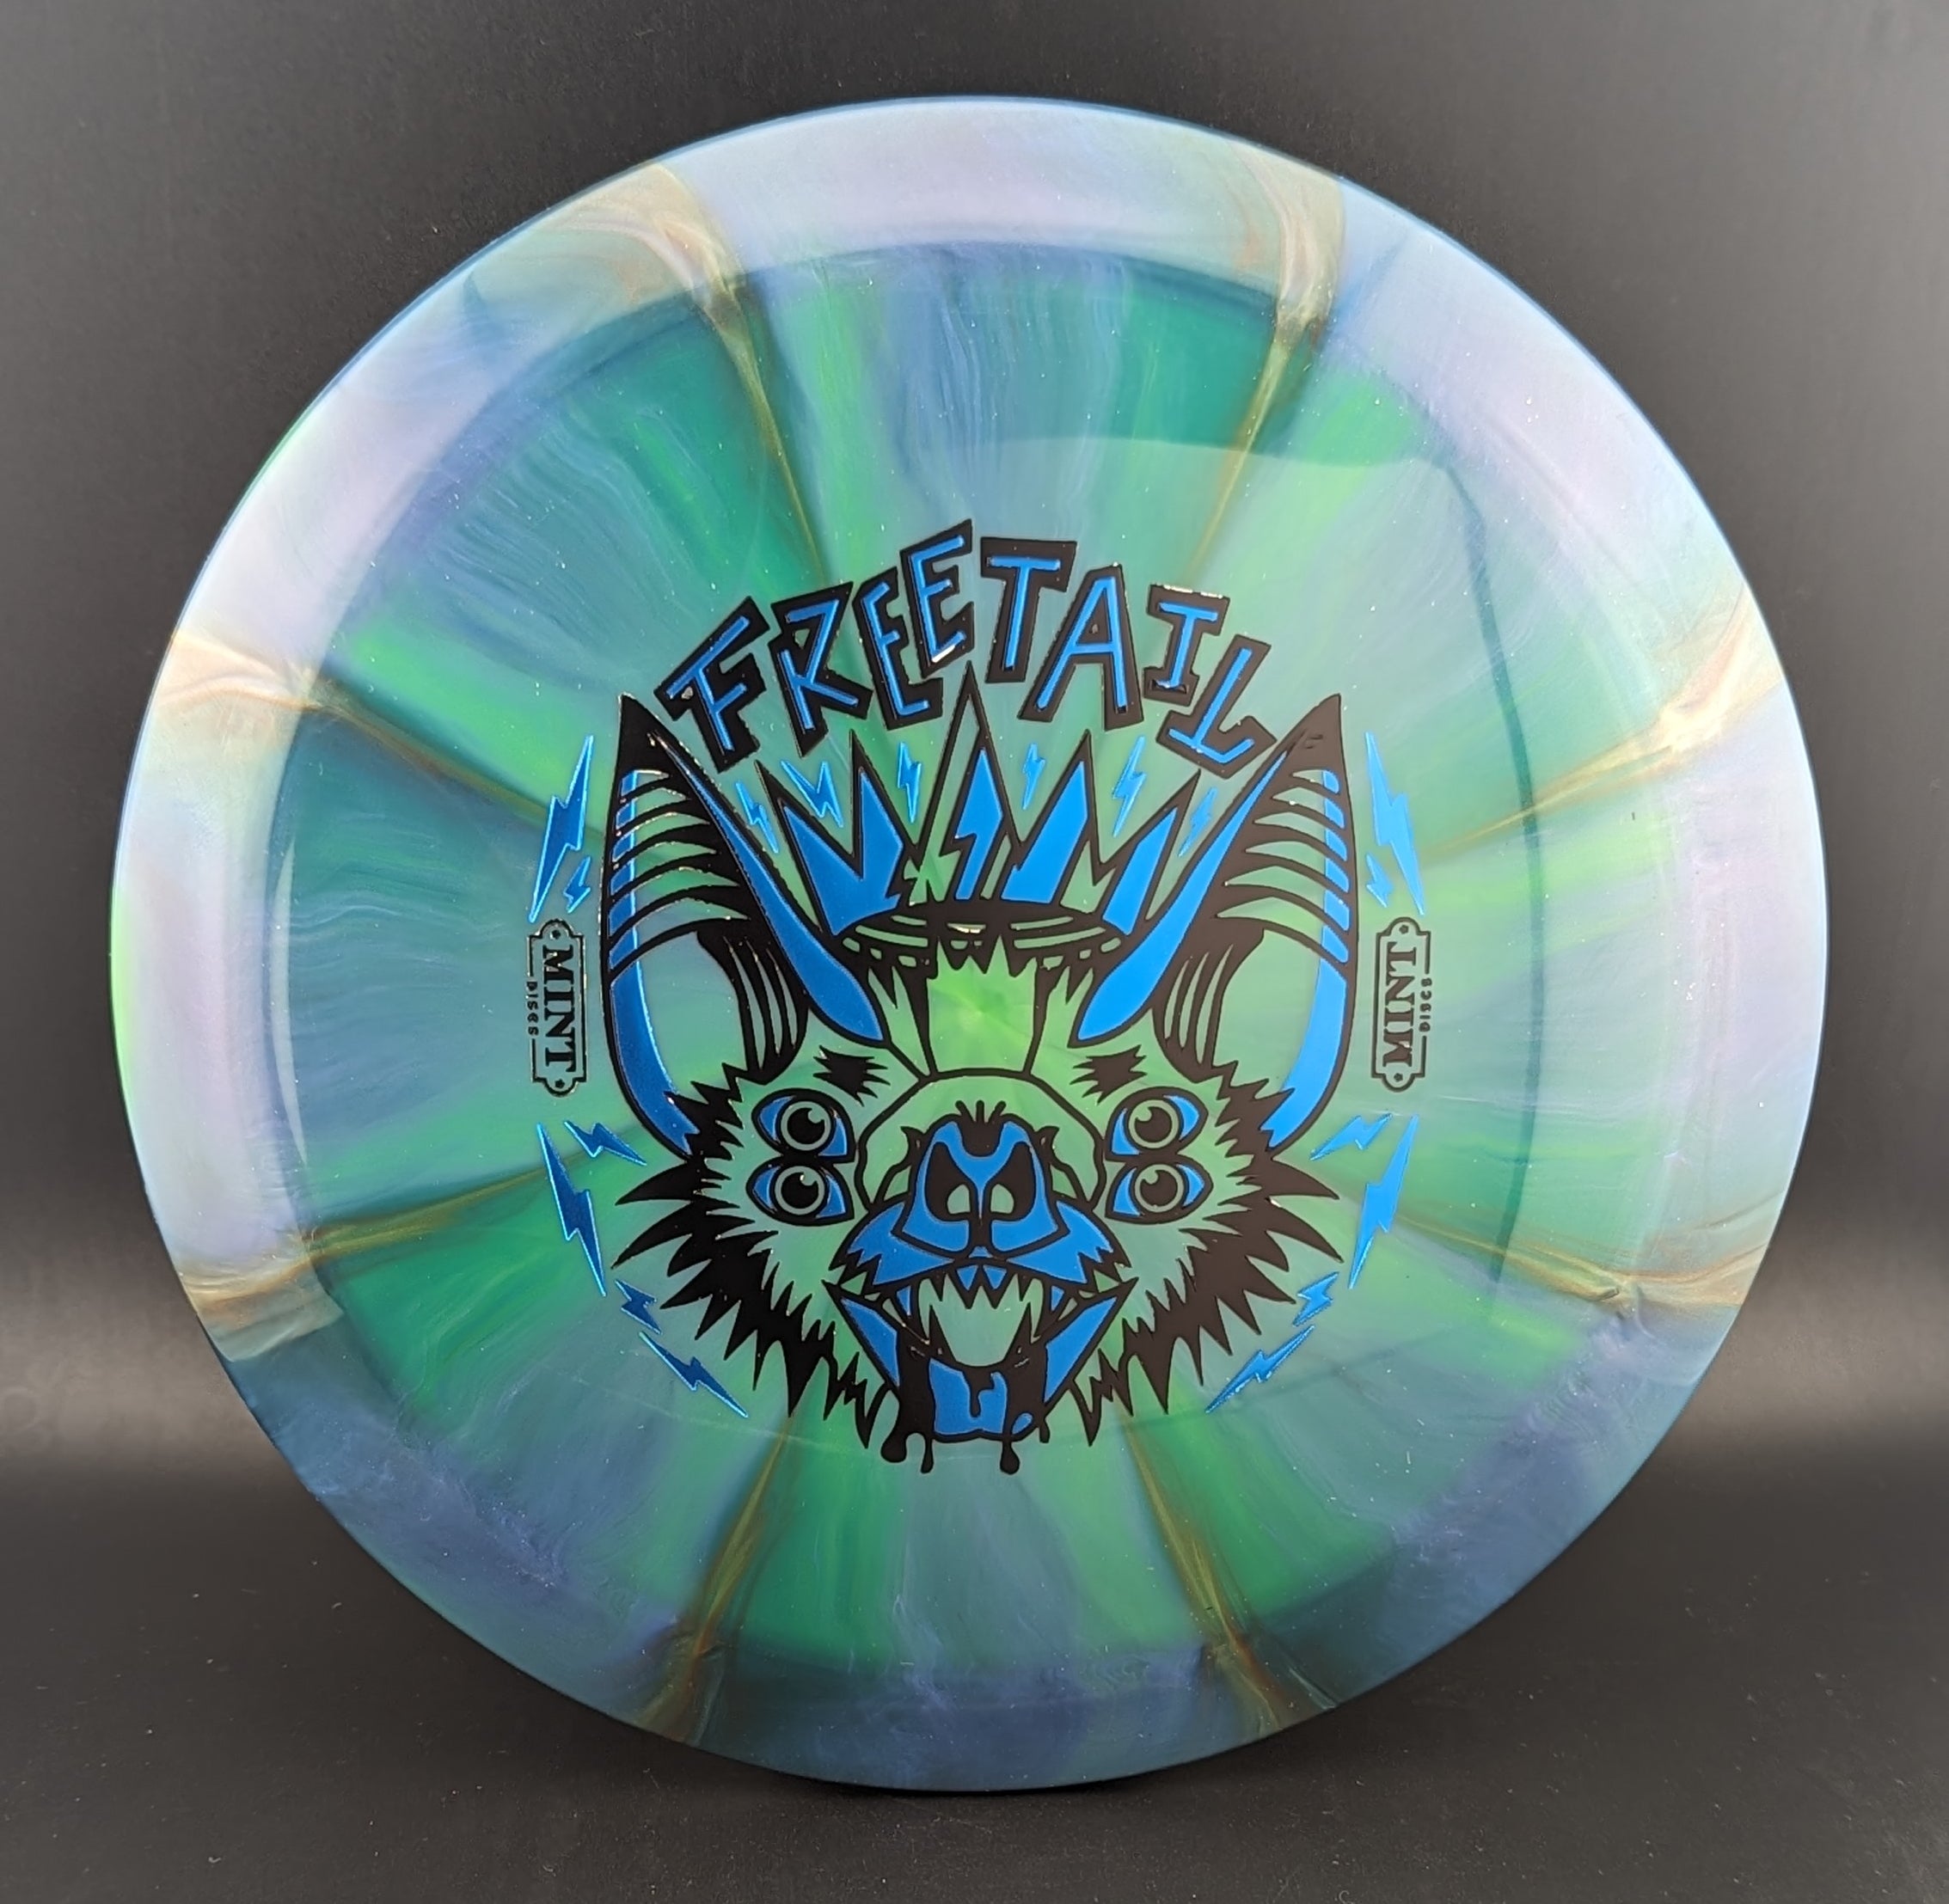 Mint Discs Swirly Sublime Freetail - 0